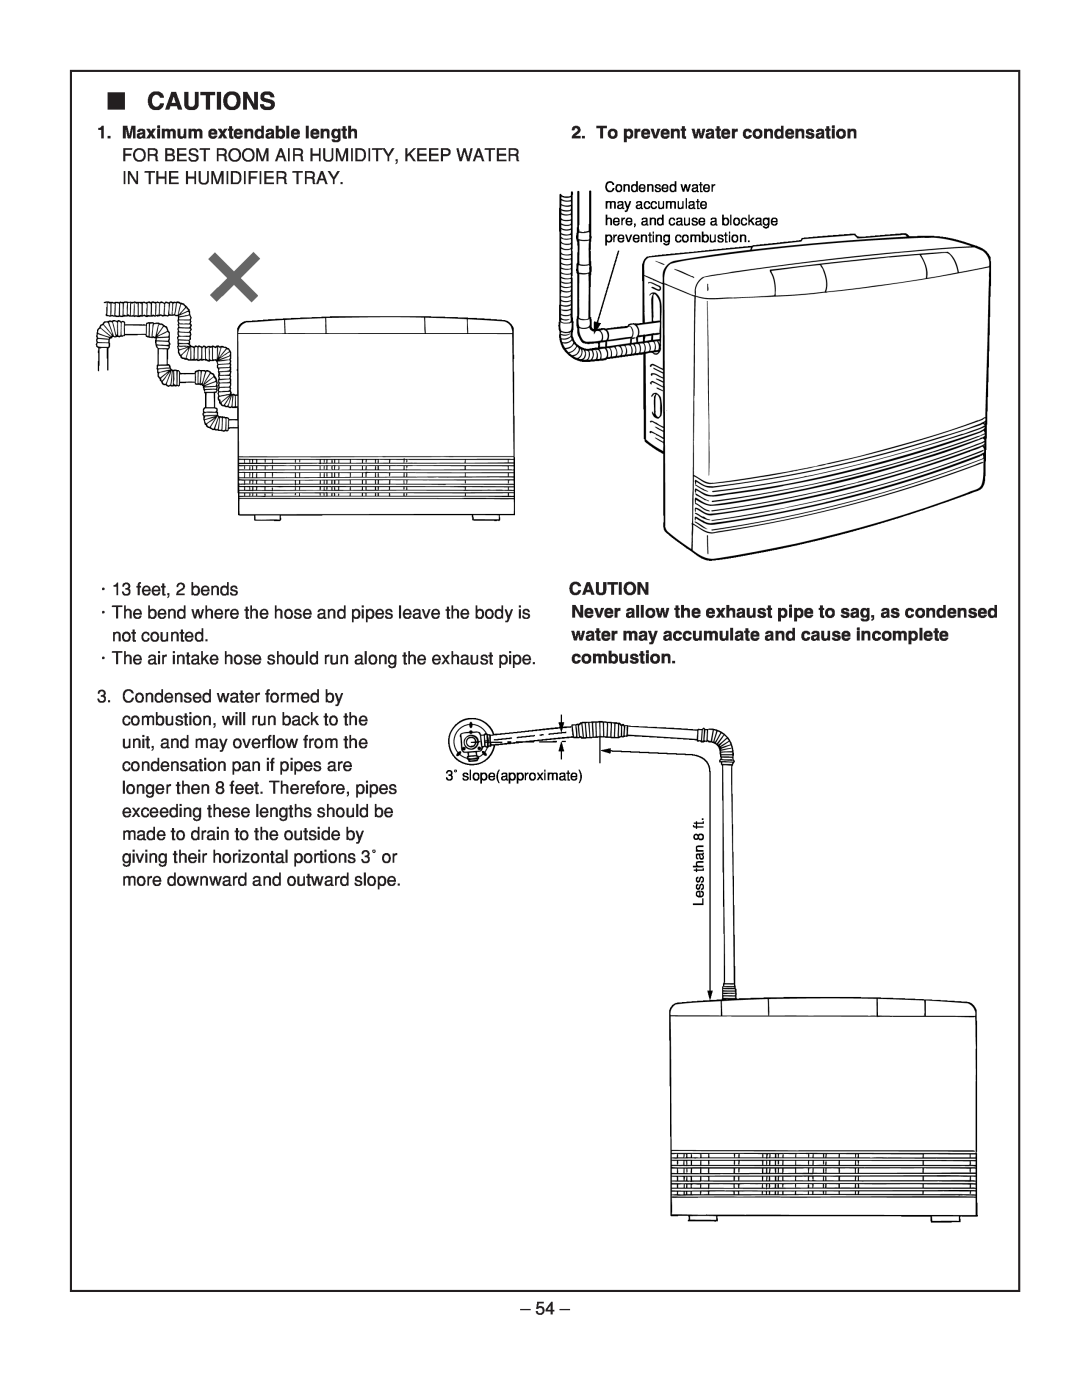 Rinnai RHFE-431FA installation manual Cautions, Maximum extendable length, To prevent water condensation 